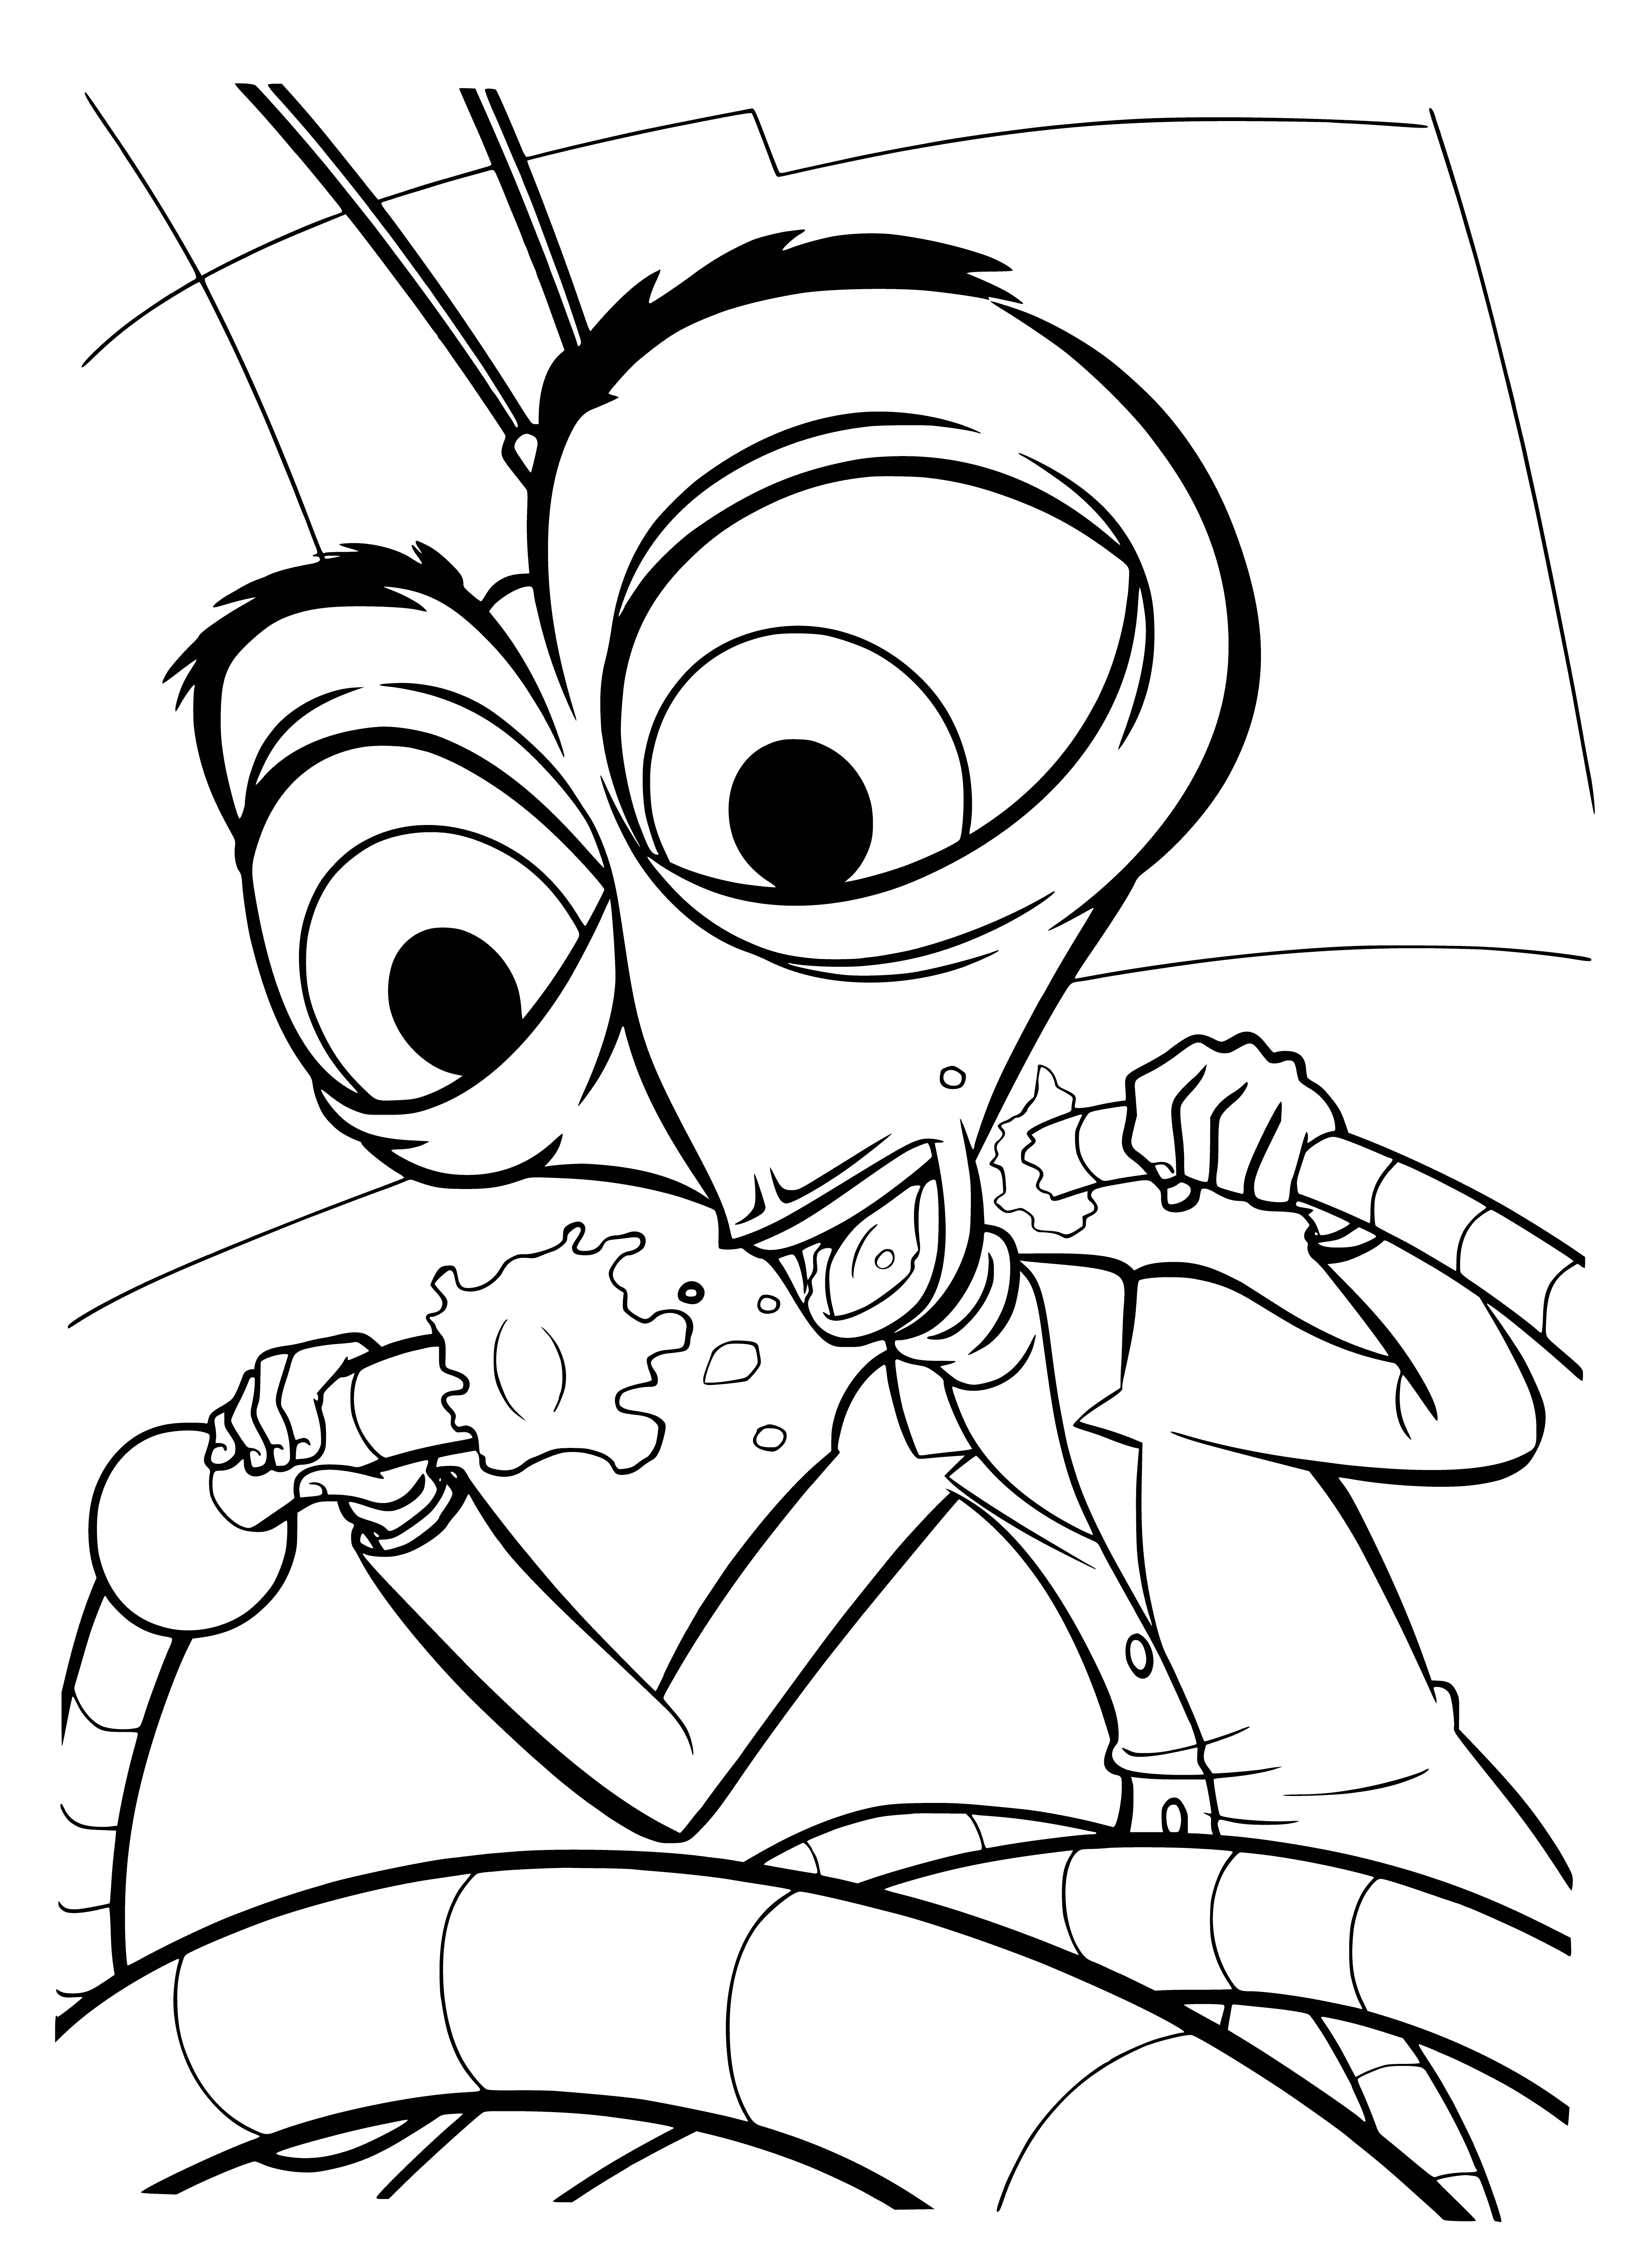 Dr. Cockroach coloring page